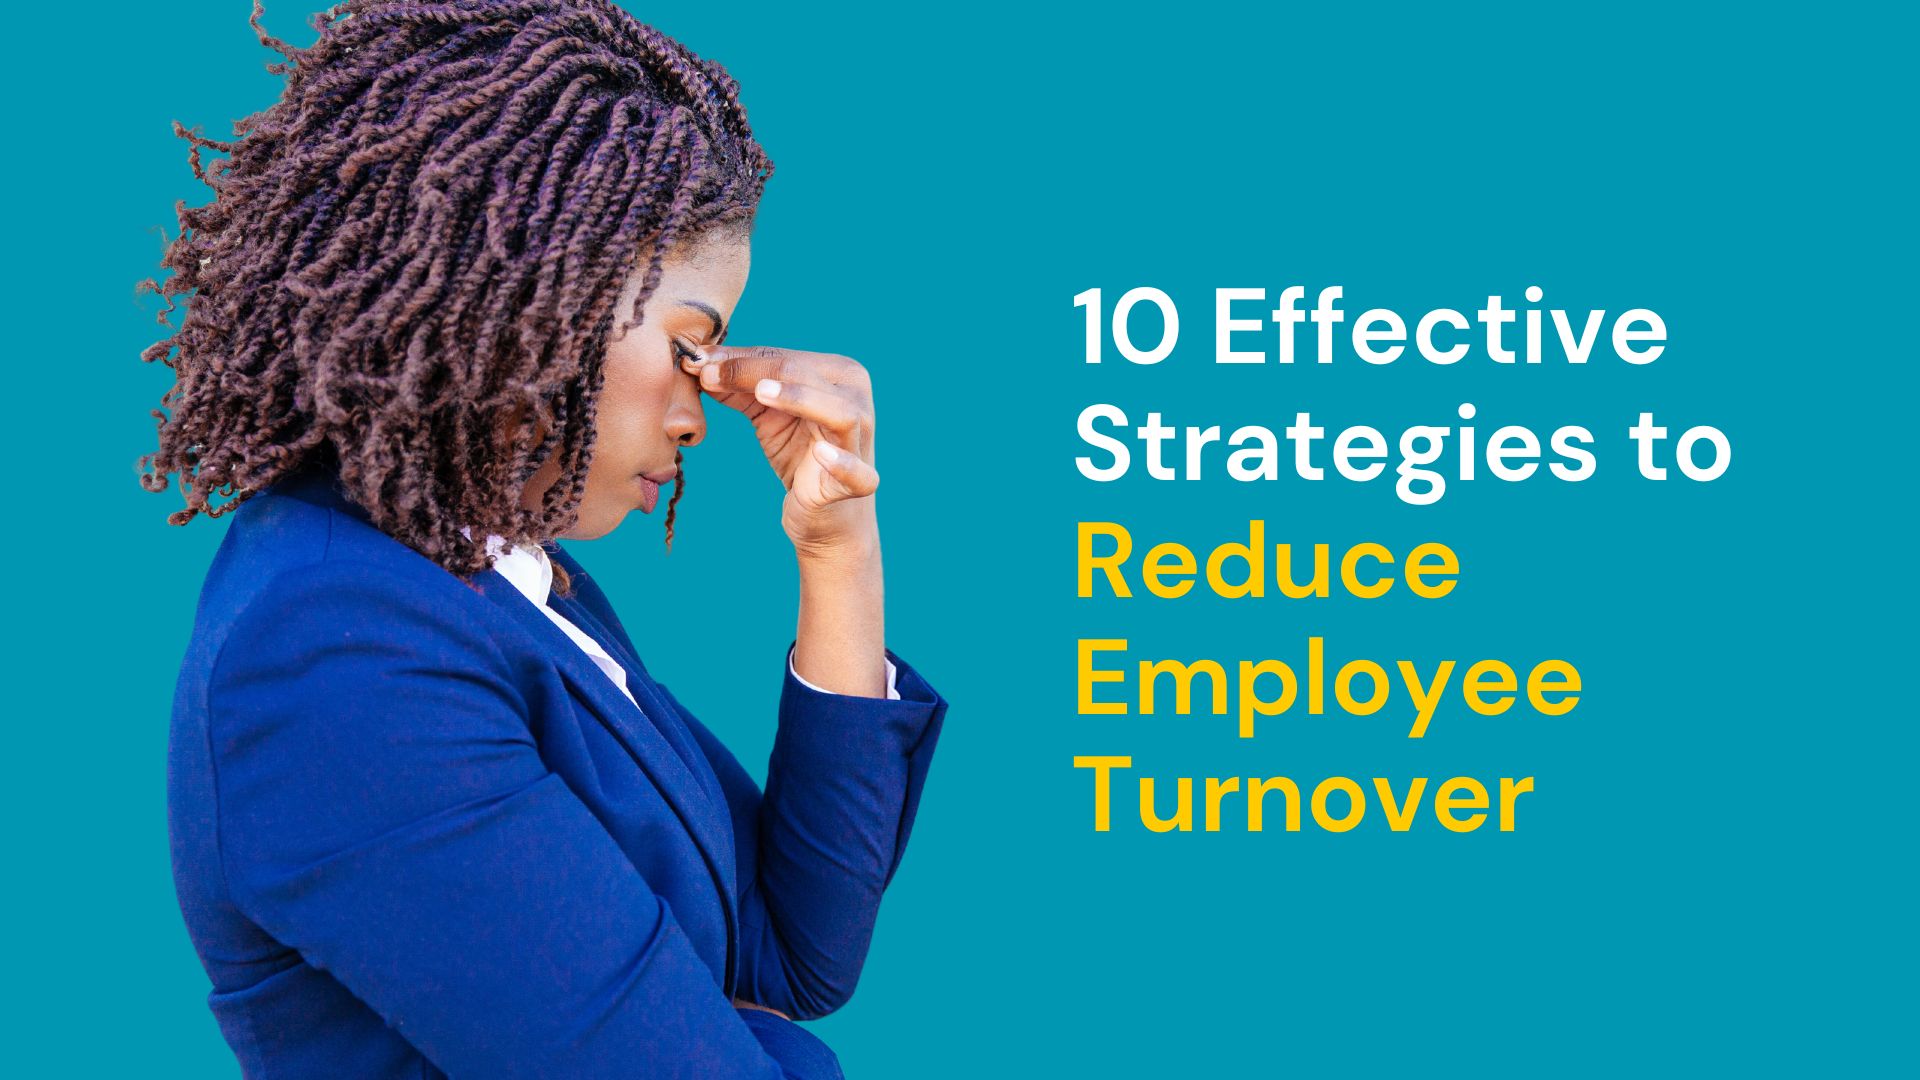 10 Effective Strategies to Reduce Employee Turnover